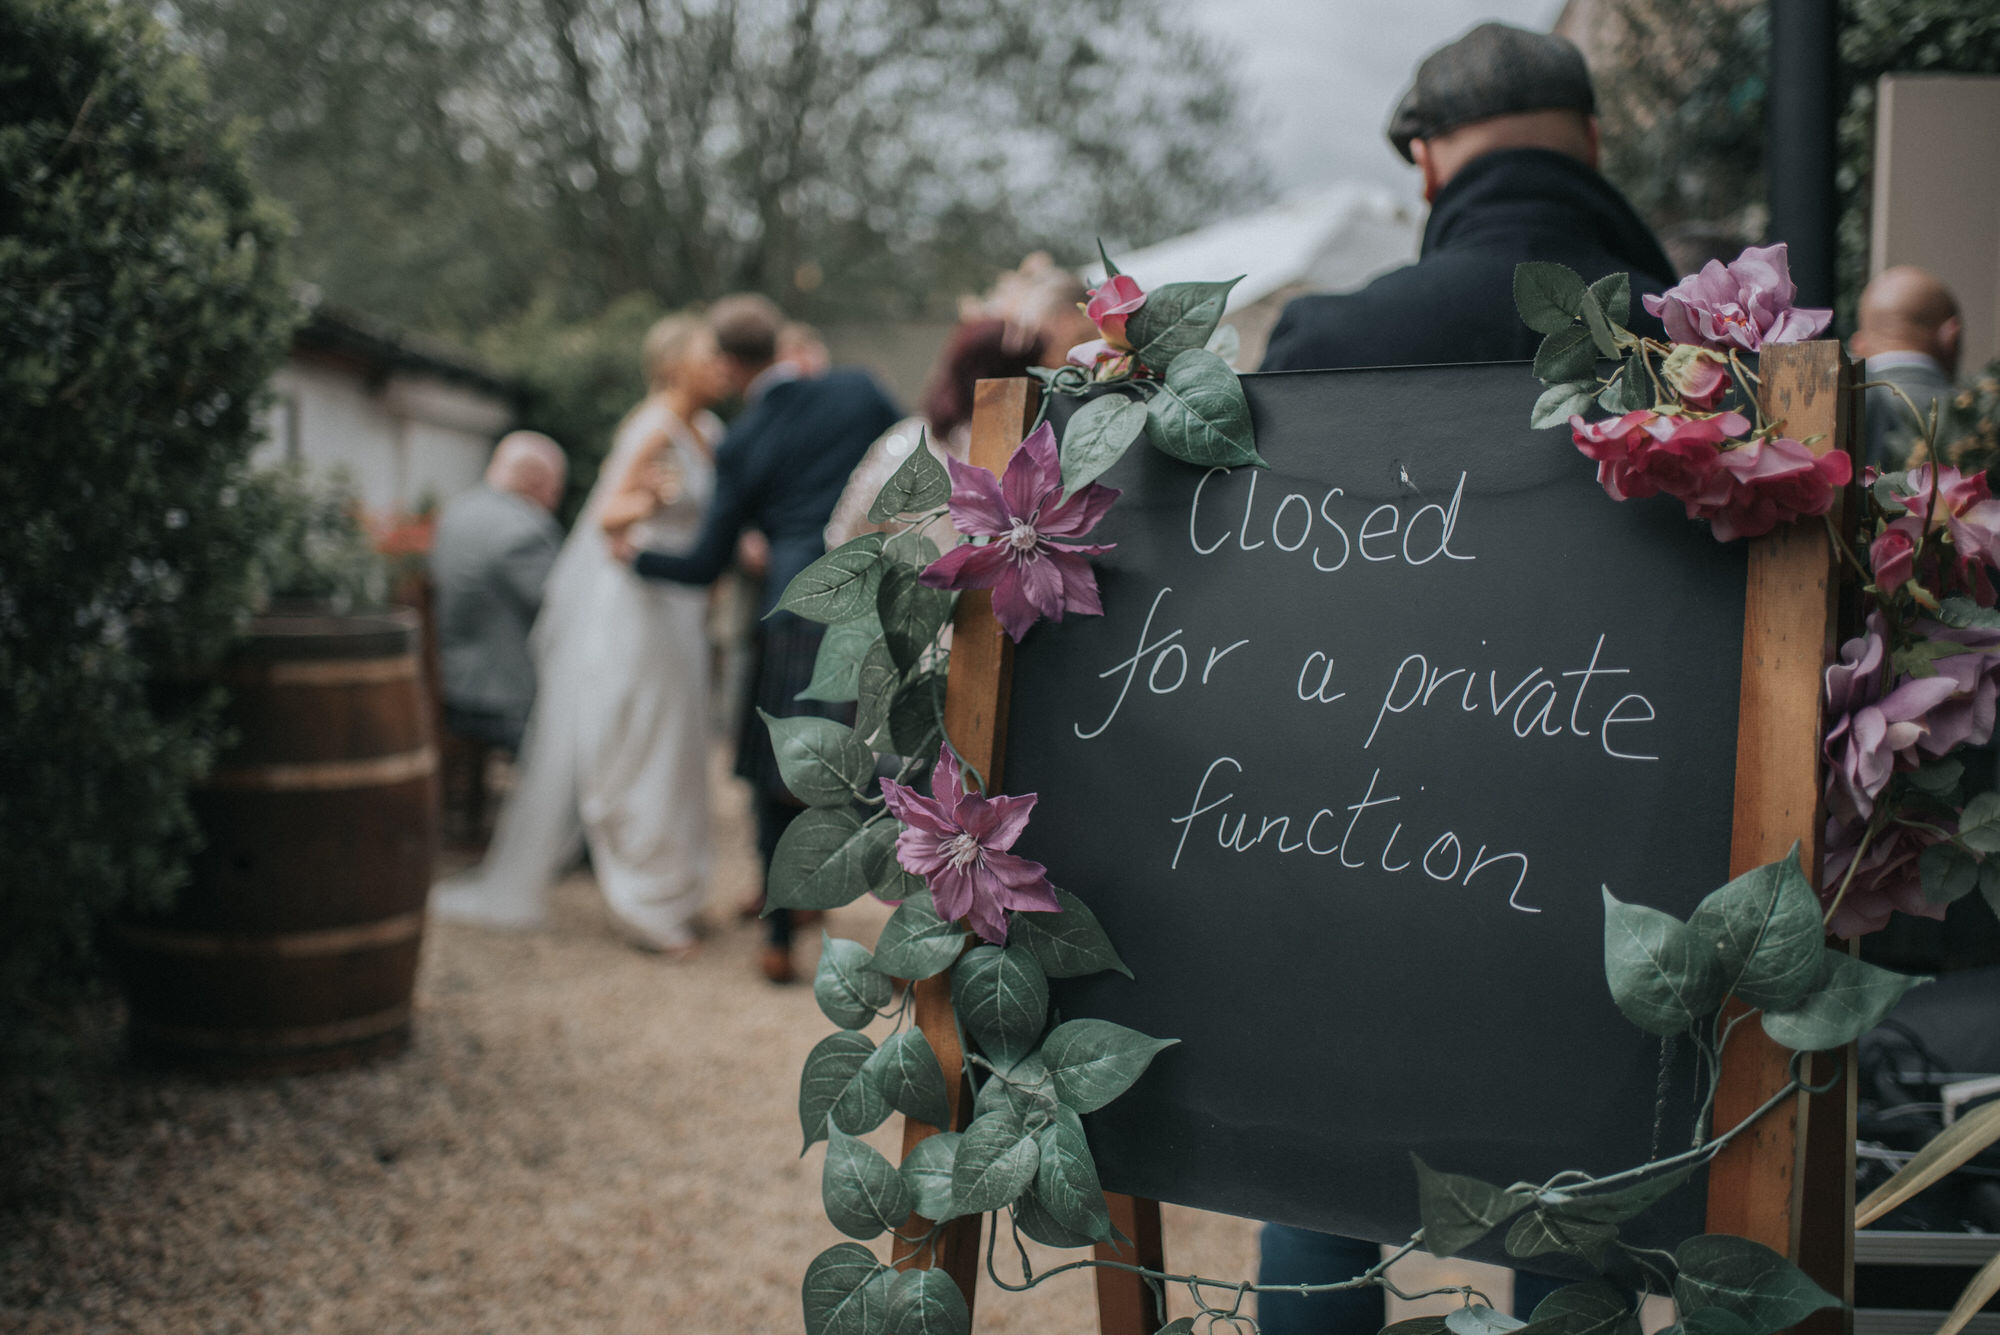 A chalkboard sign reads "Closed for a private function" at The Bothy, Glasgow